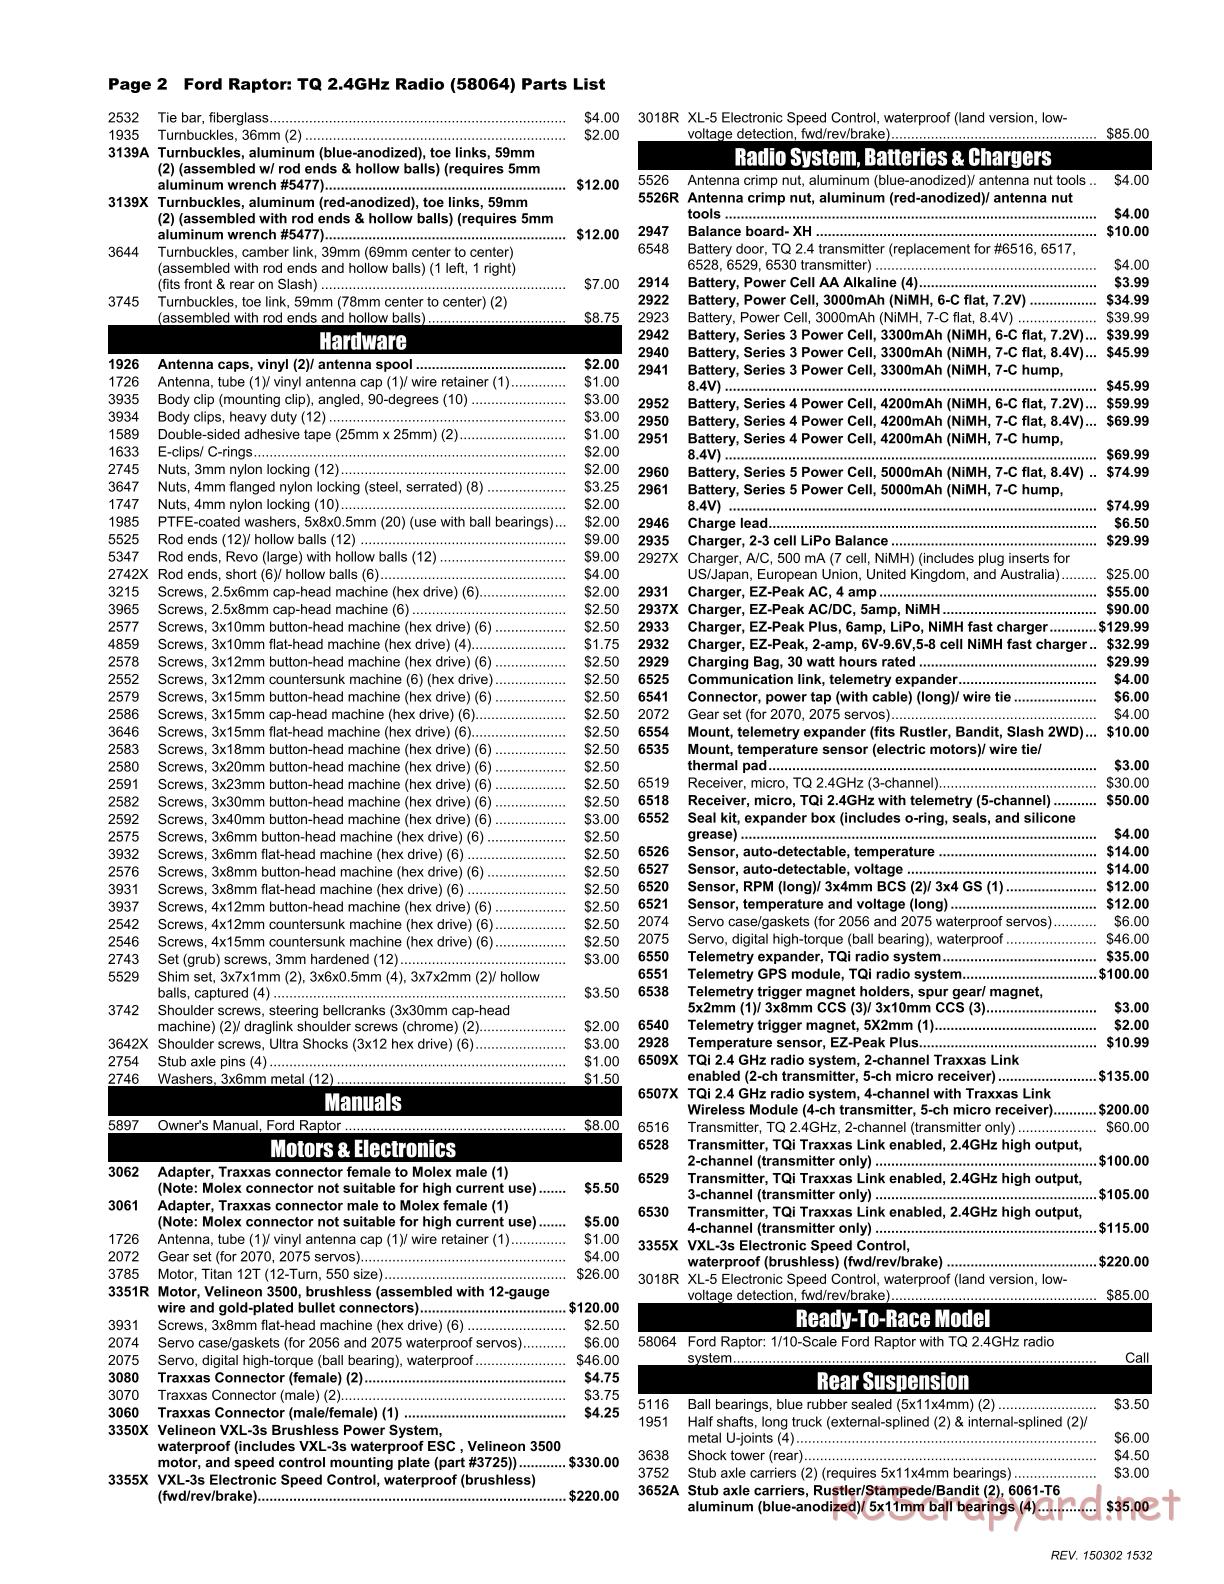 Traxxas - Ford F-150 SVT Raptor (2013) - Parts List - Page 2